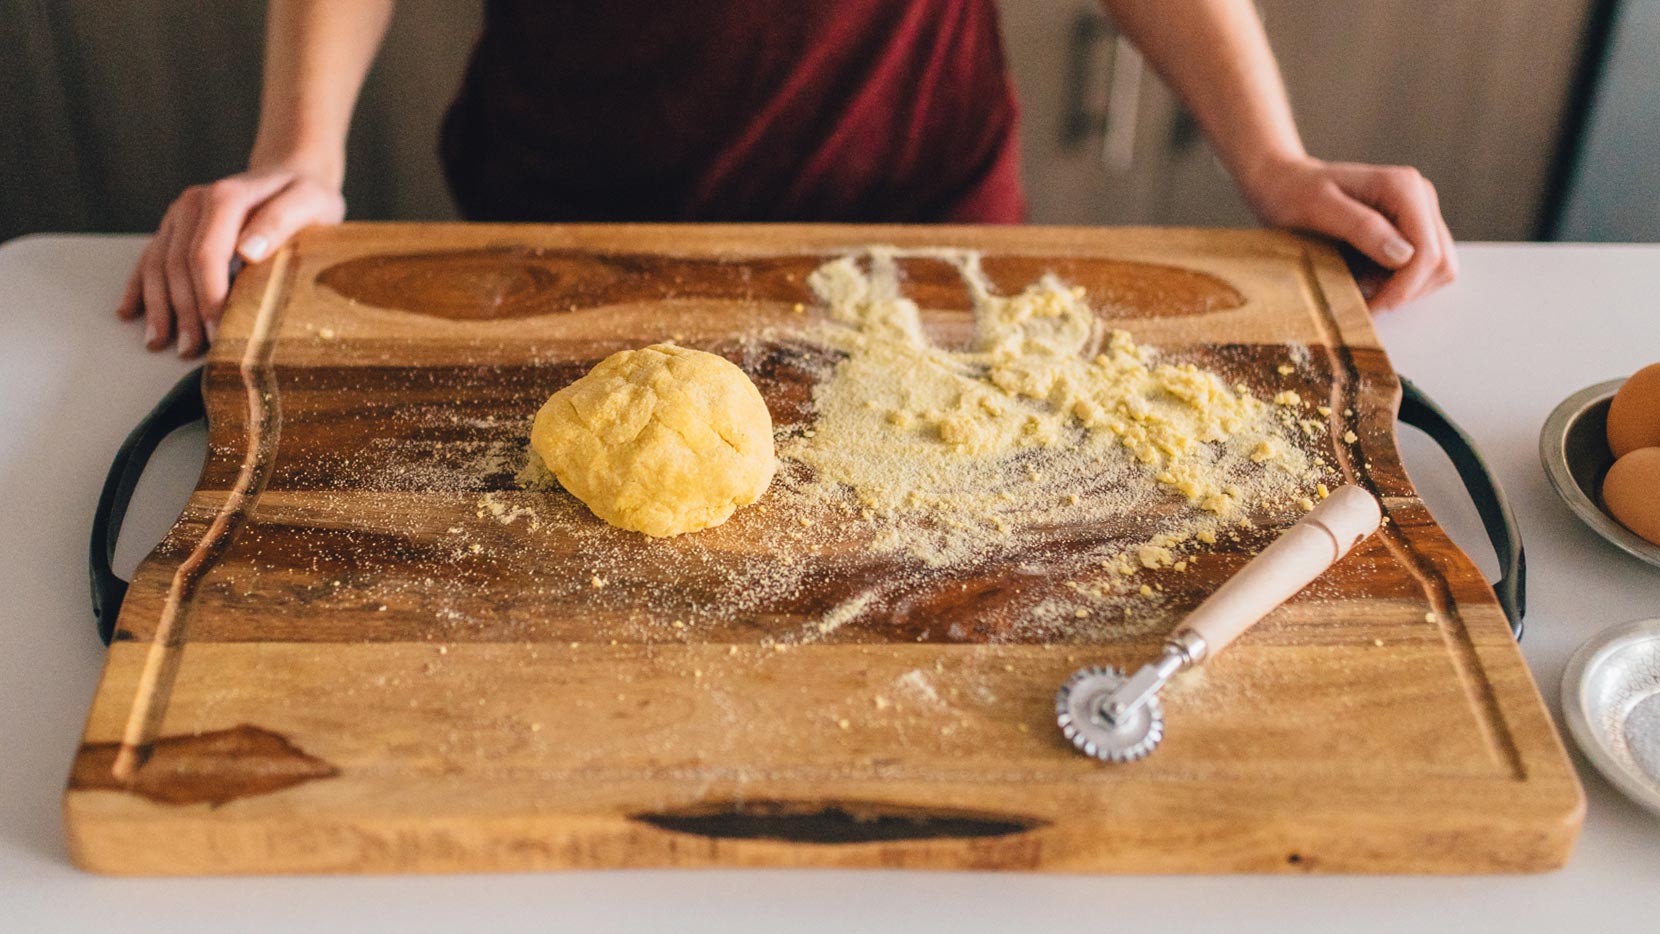 ​Roll out dough and cut into desired pasta shapes